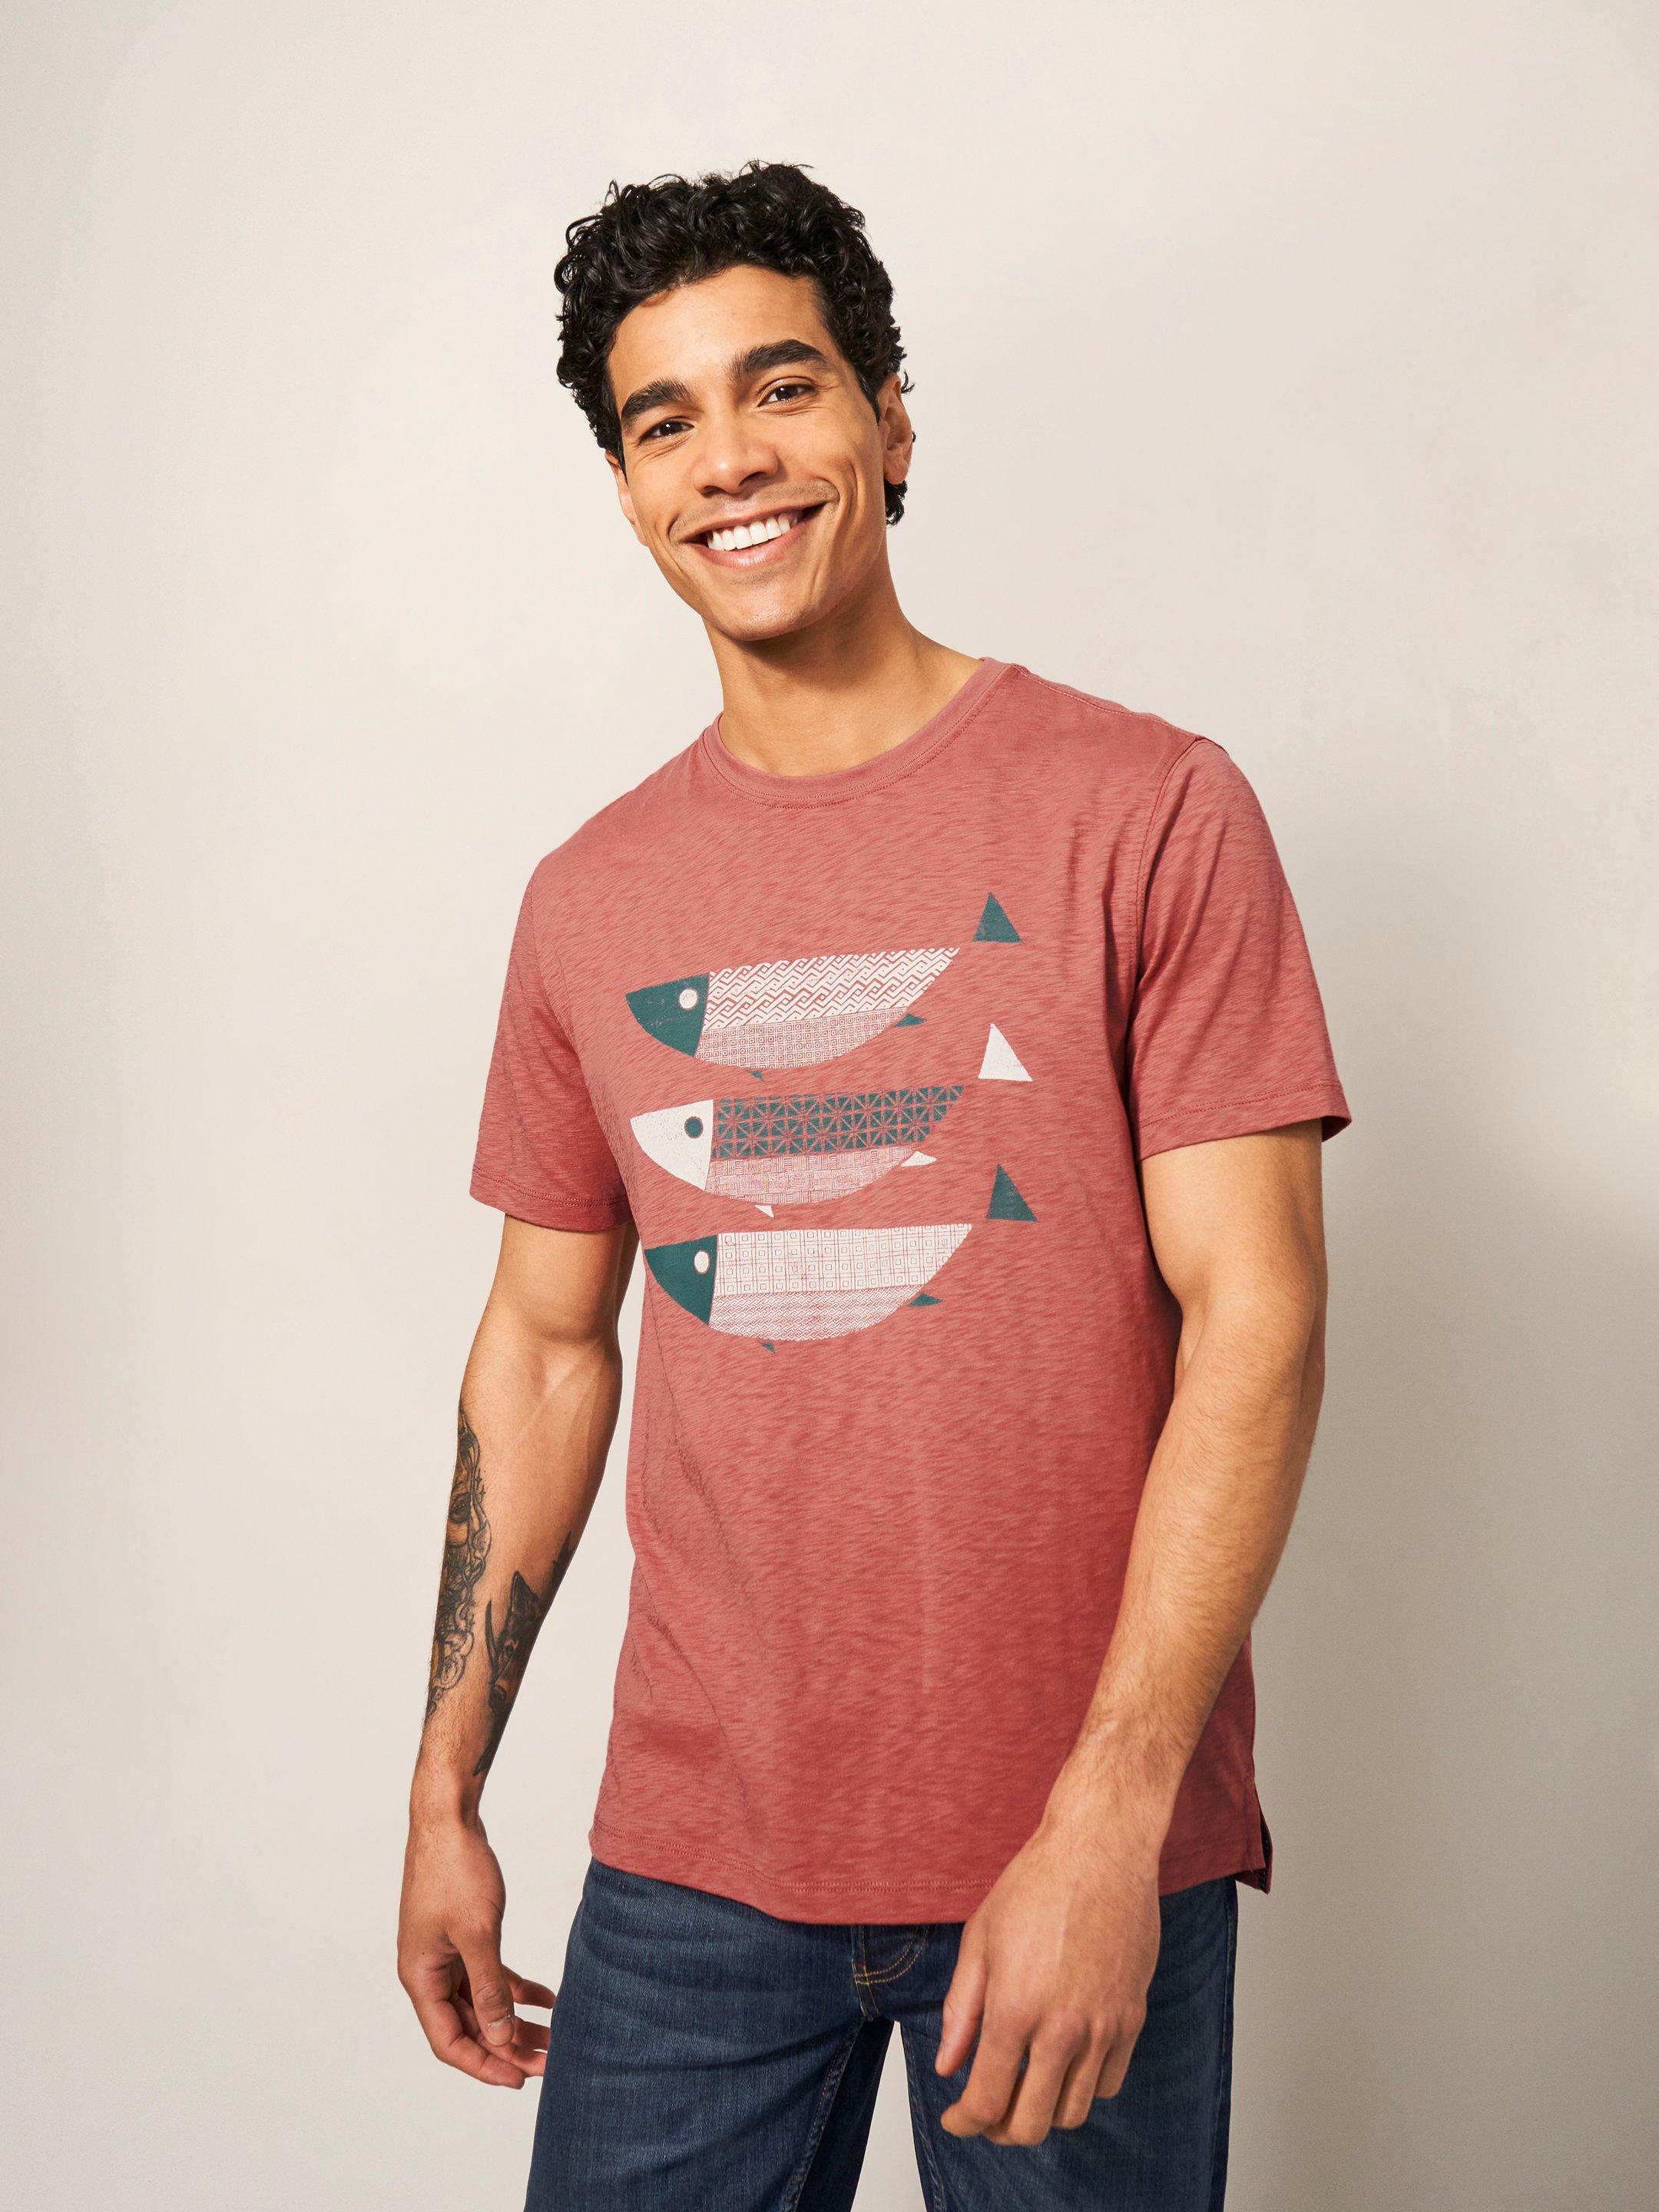 Fish Graphic Tee in DK PINK - MODEL FRONT